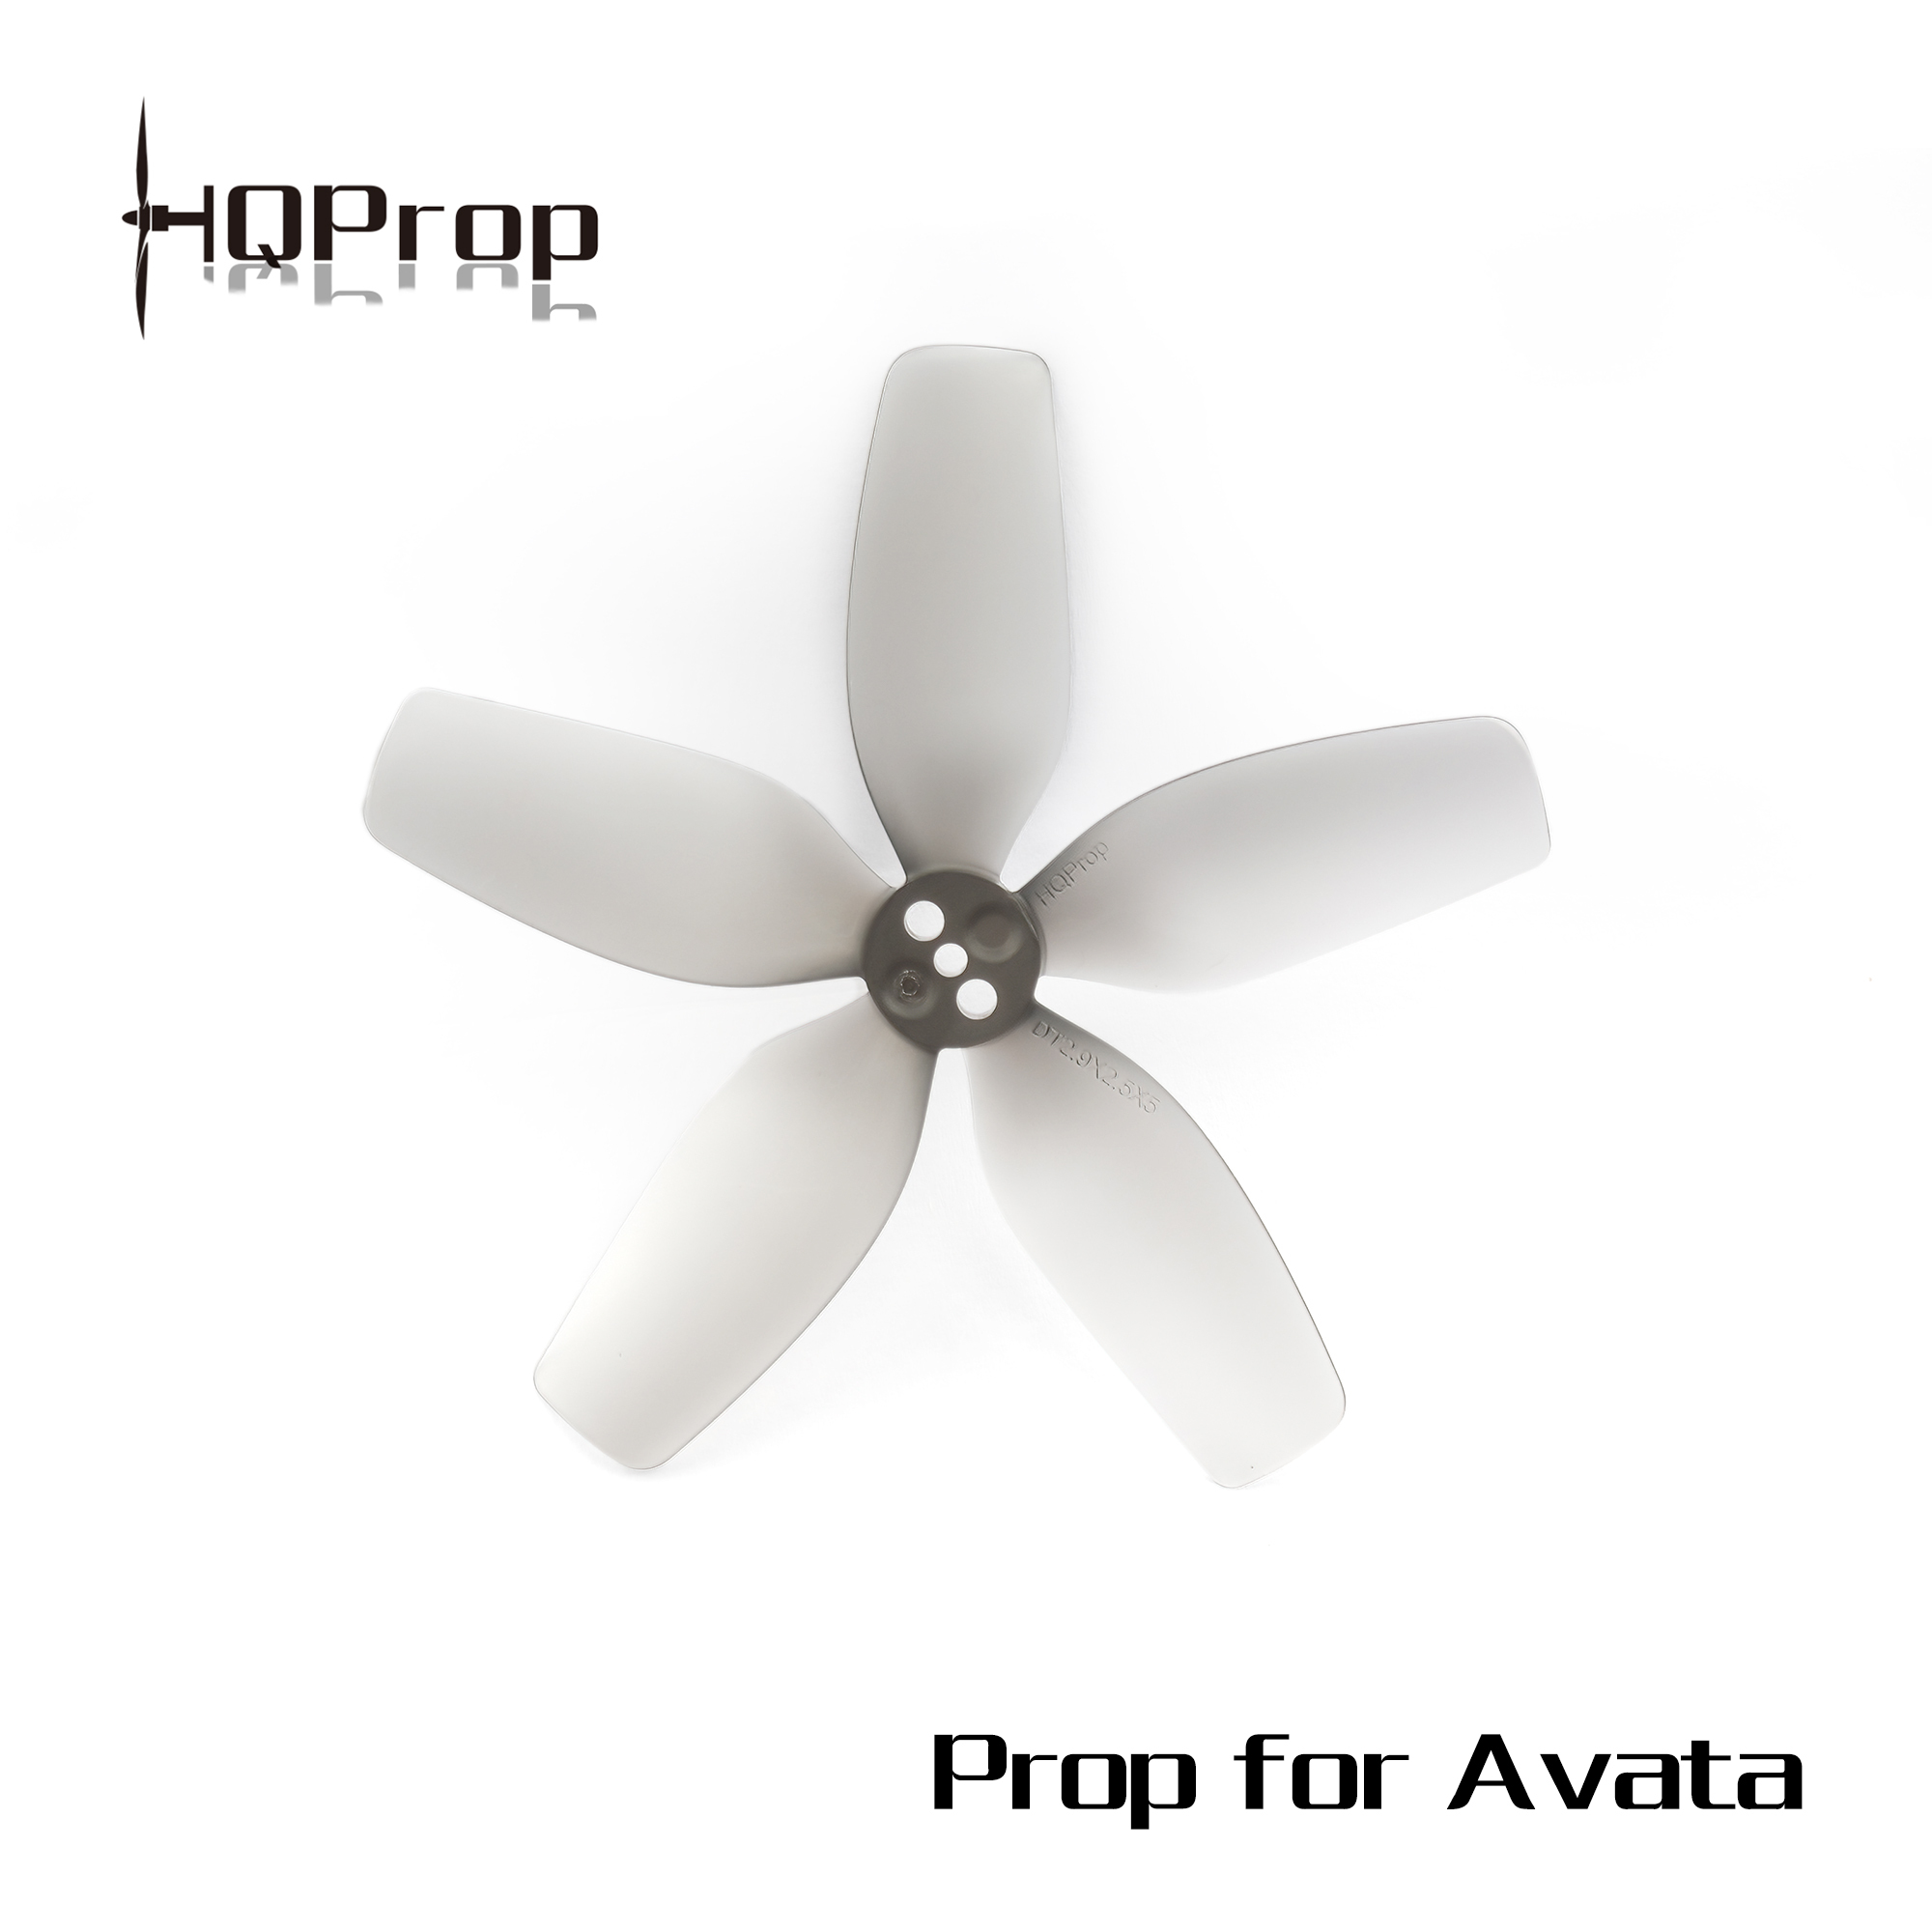 HQ Prop T2.9X2.5X5 perfect with C157 motor to upgrade DJI Avata axisflying 9X2.5X5 2.9inch 3-blade Drone Prop pc propeller for rc fpv freestyle propeller drone blade props 8 pieces propeller,9" fpv propeller,pc propeller for rc fpv freestyle 3inch,3-blade pc propeller for rc fpv drone